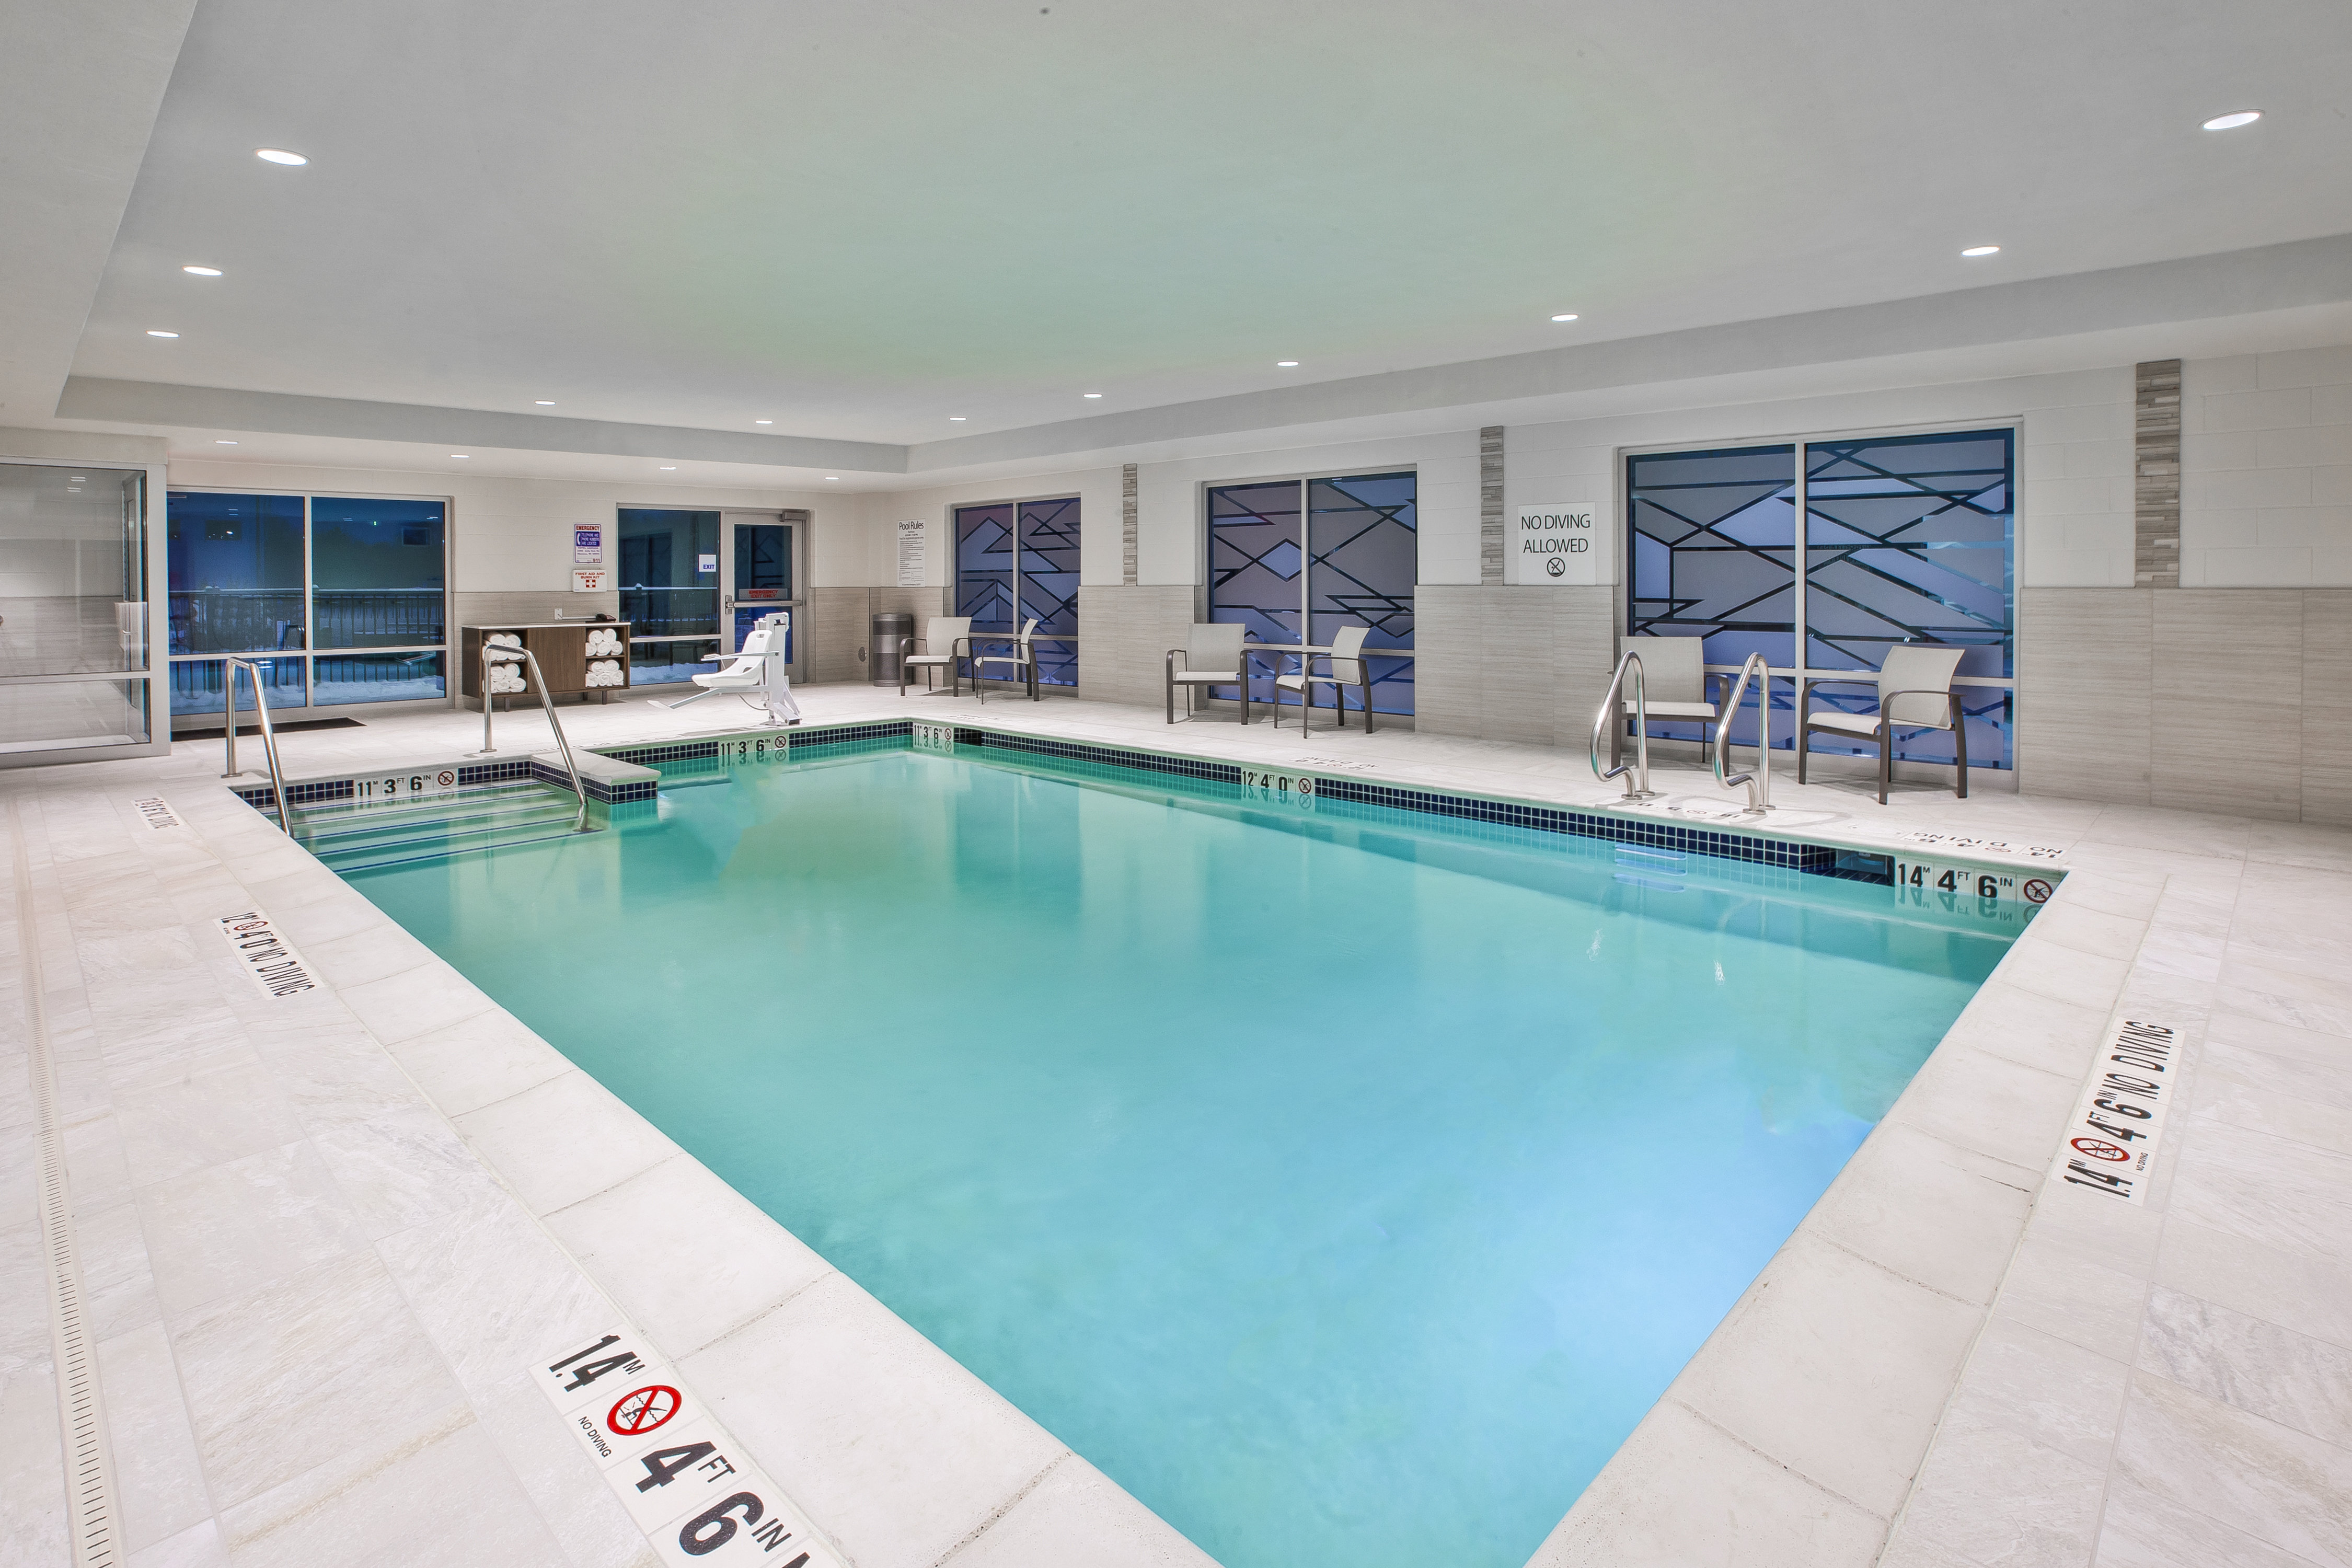 Have a relaxing day in our heated indoor pool. 